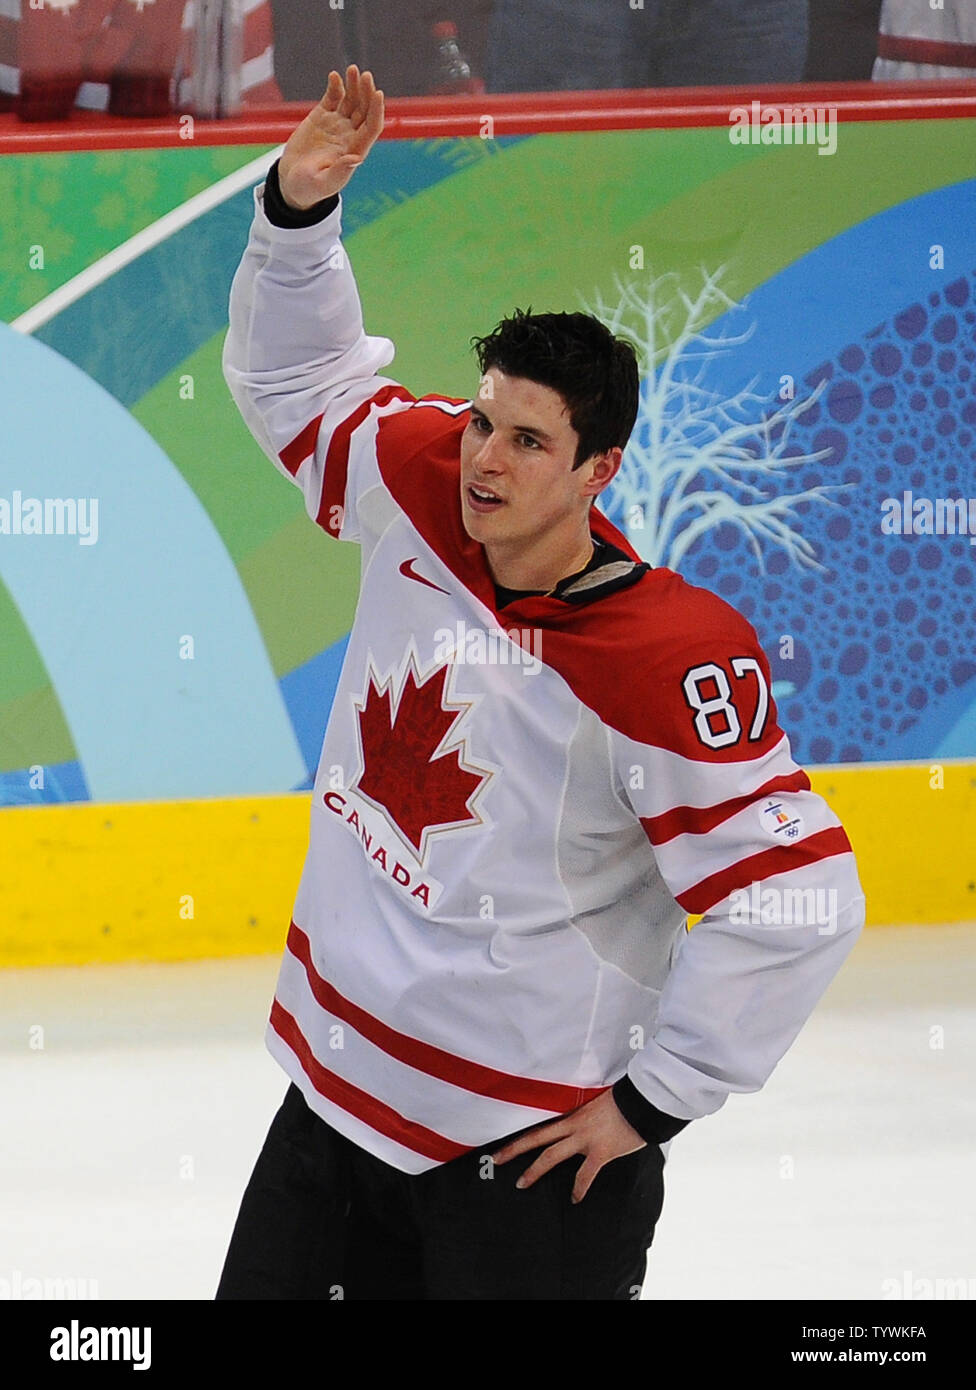 Canada's Sidney Crosby waves to cheering fans after scoring on USA's Ryan Miller to win in overtime of the gold medal men's ice hockey game at Canada Hockey Place in Vancouver, Canada, during the 2010 Winter Olympics on February 28, 2010.      UPI/Roger L. Wollenberg Stock Photo